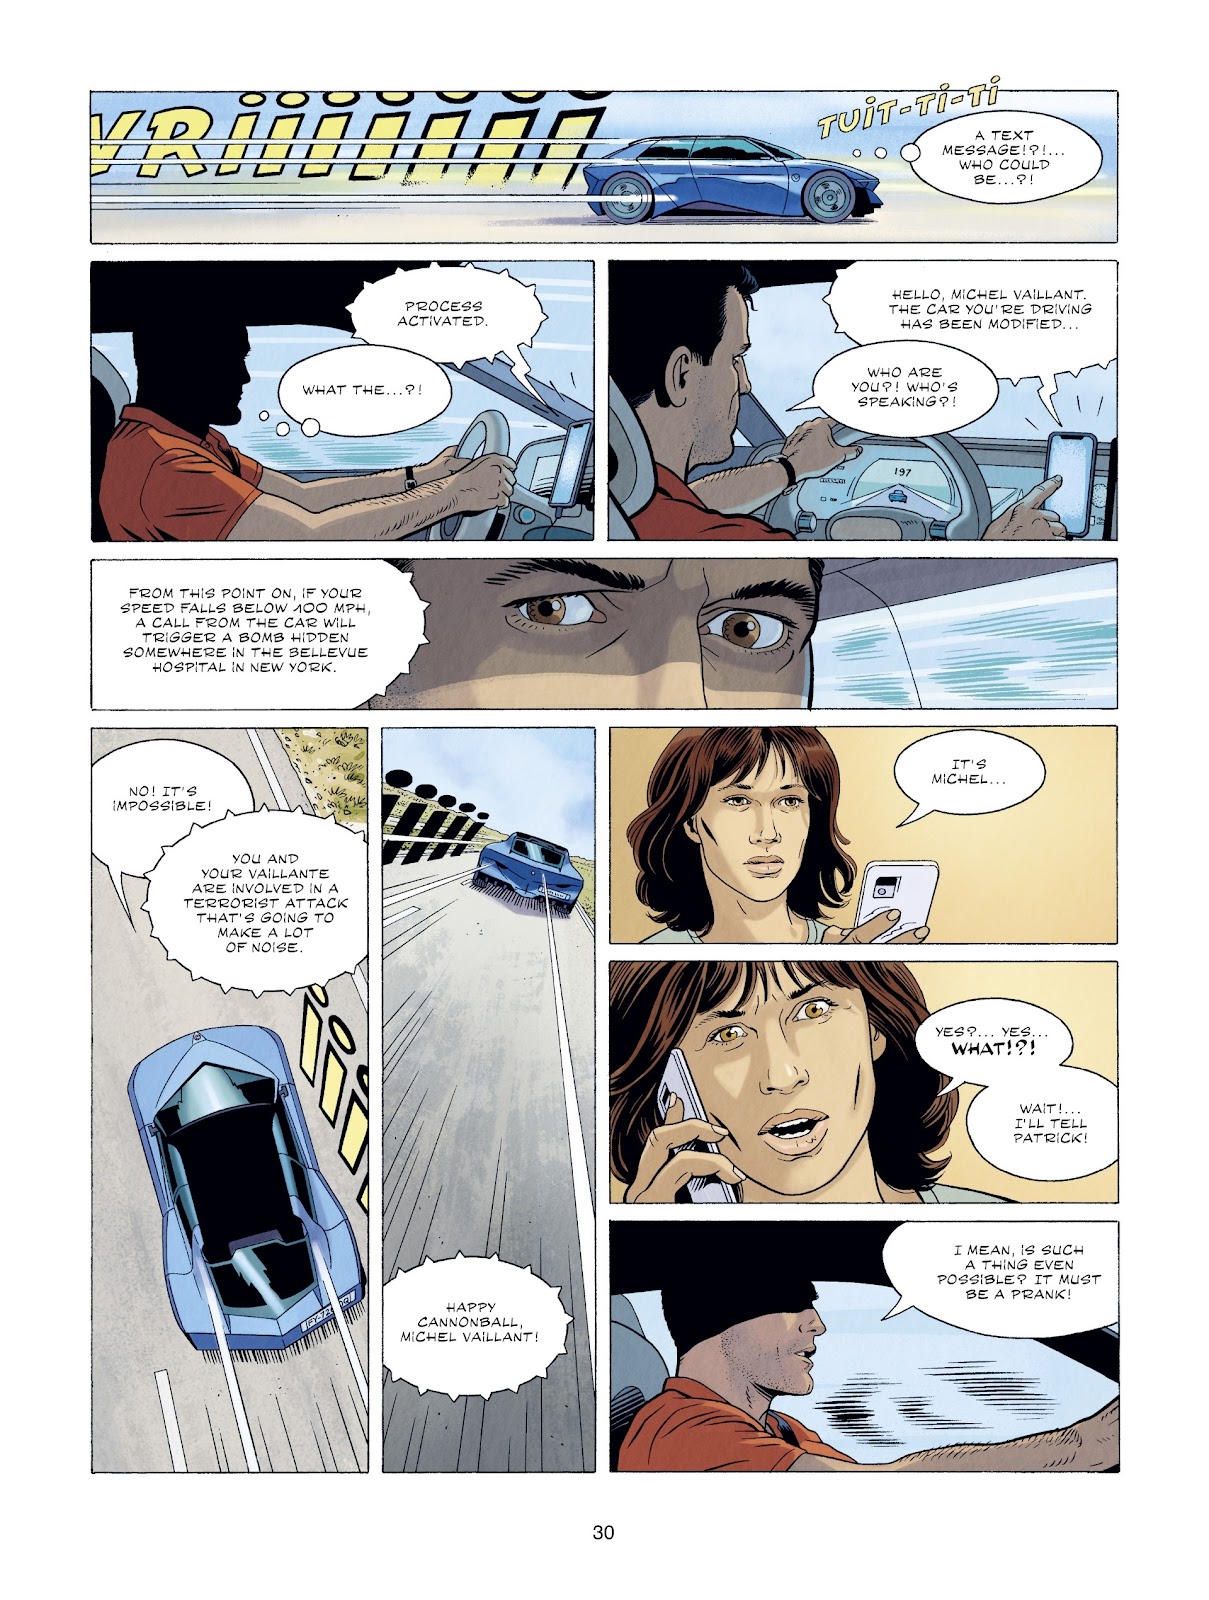 Michel Vaillant issue 11 - Page 30